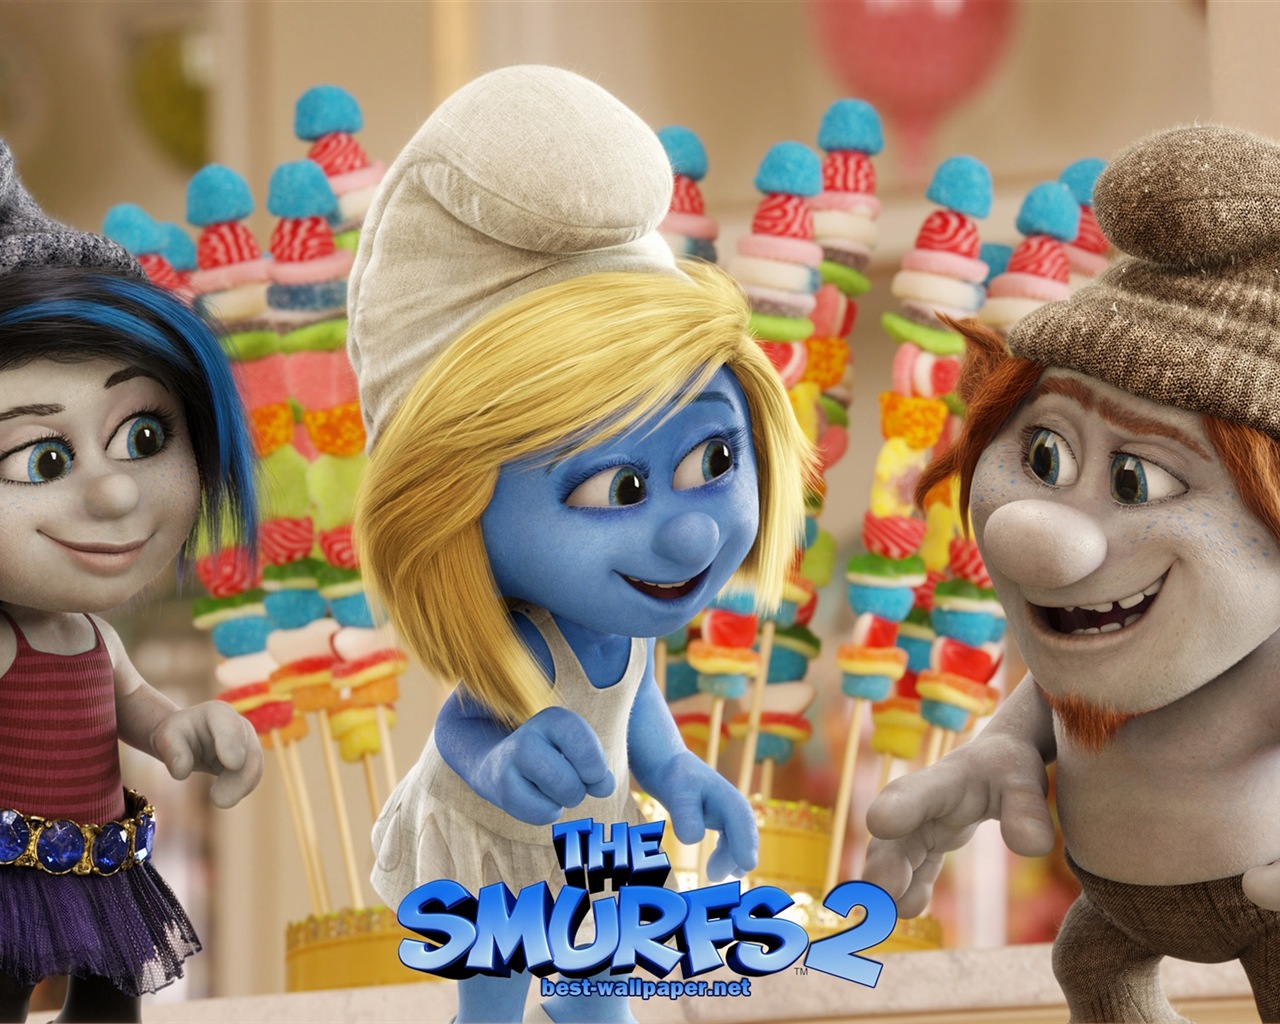 The Smurfs 2 HD movie wallpapers #5 - 1280x1024